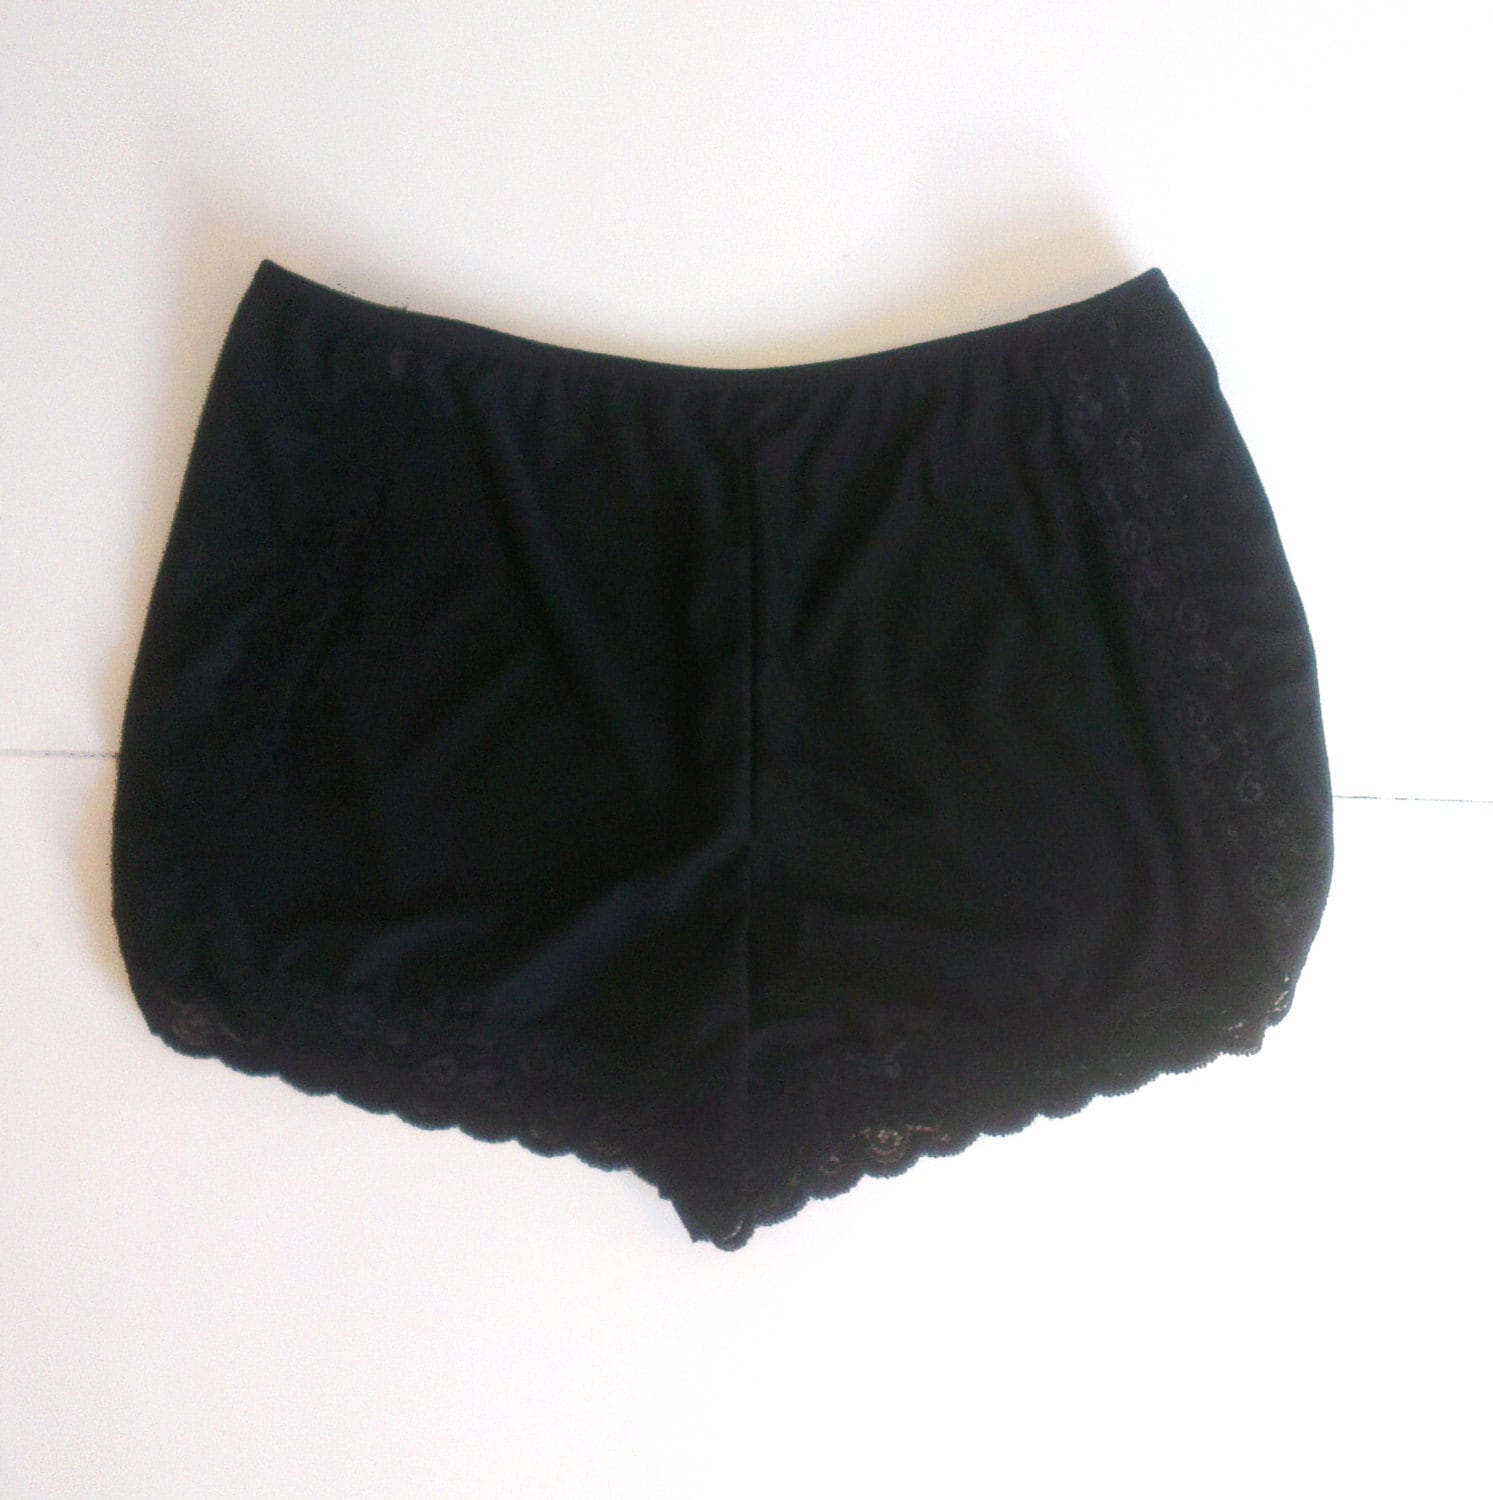 BLACK LACE high waisted french knickers / panties with soft